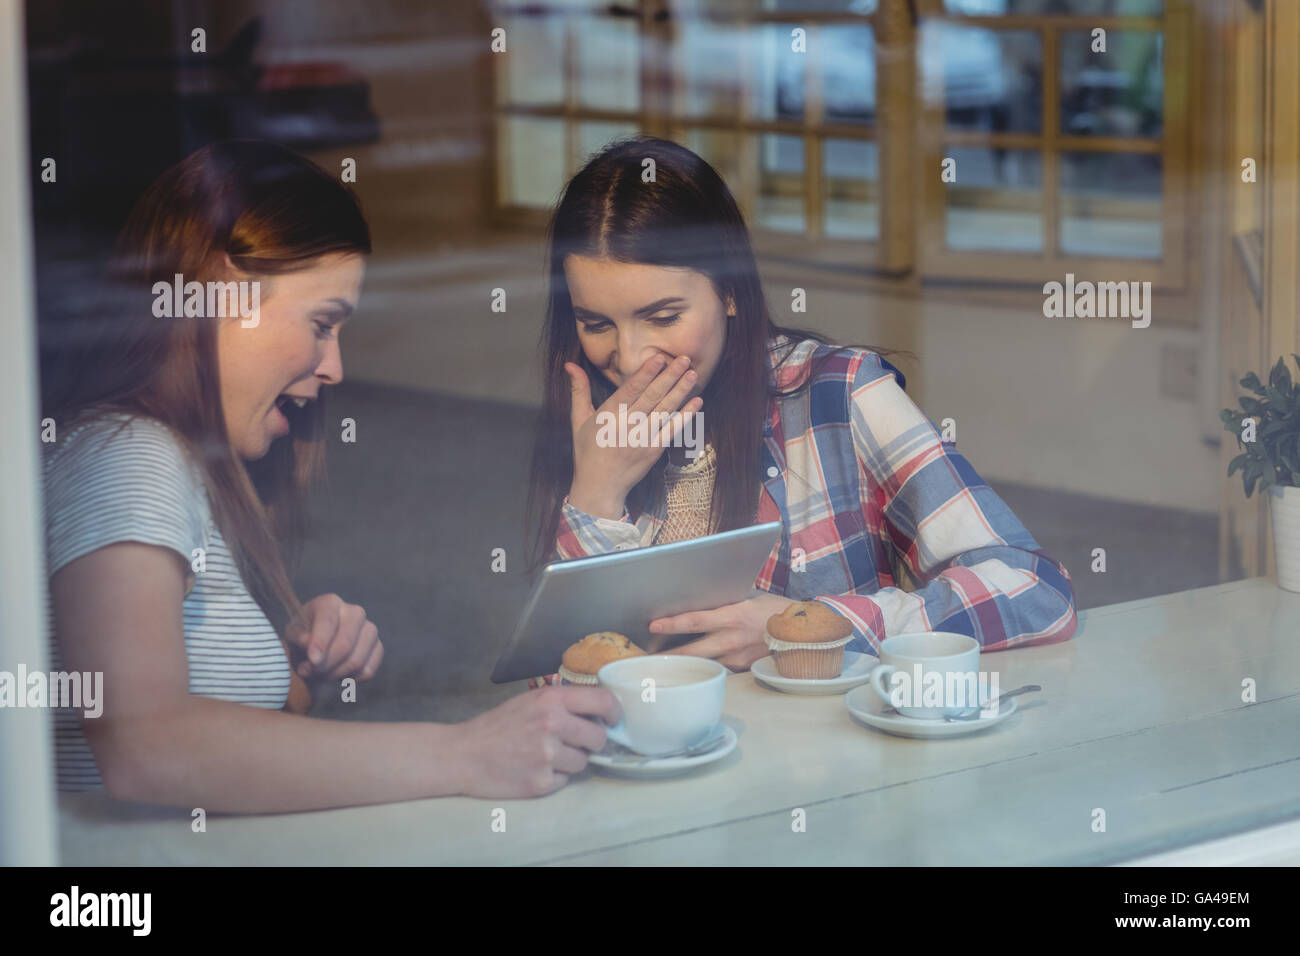 Cheerful women using digital tablet at coffee shop Banque D'Images